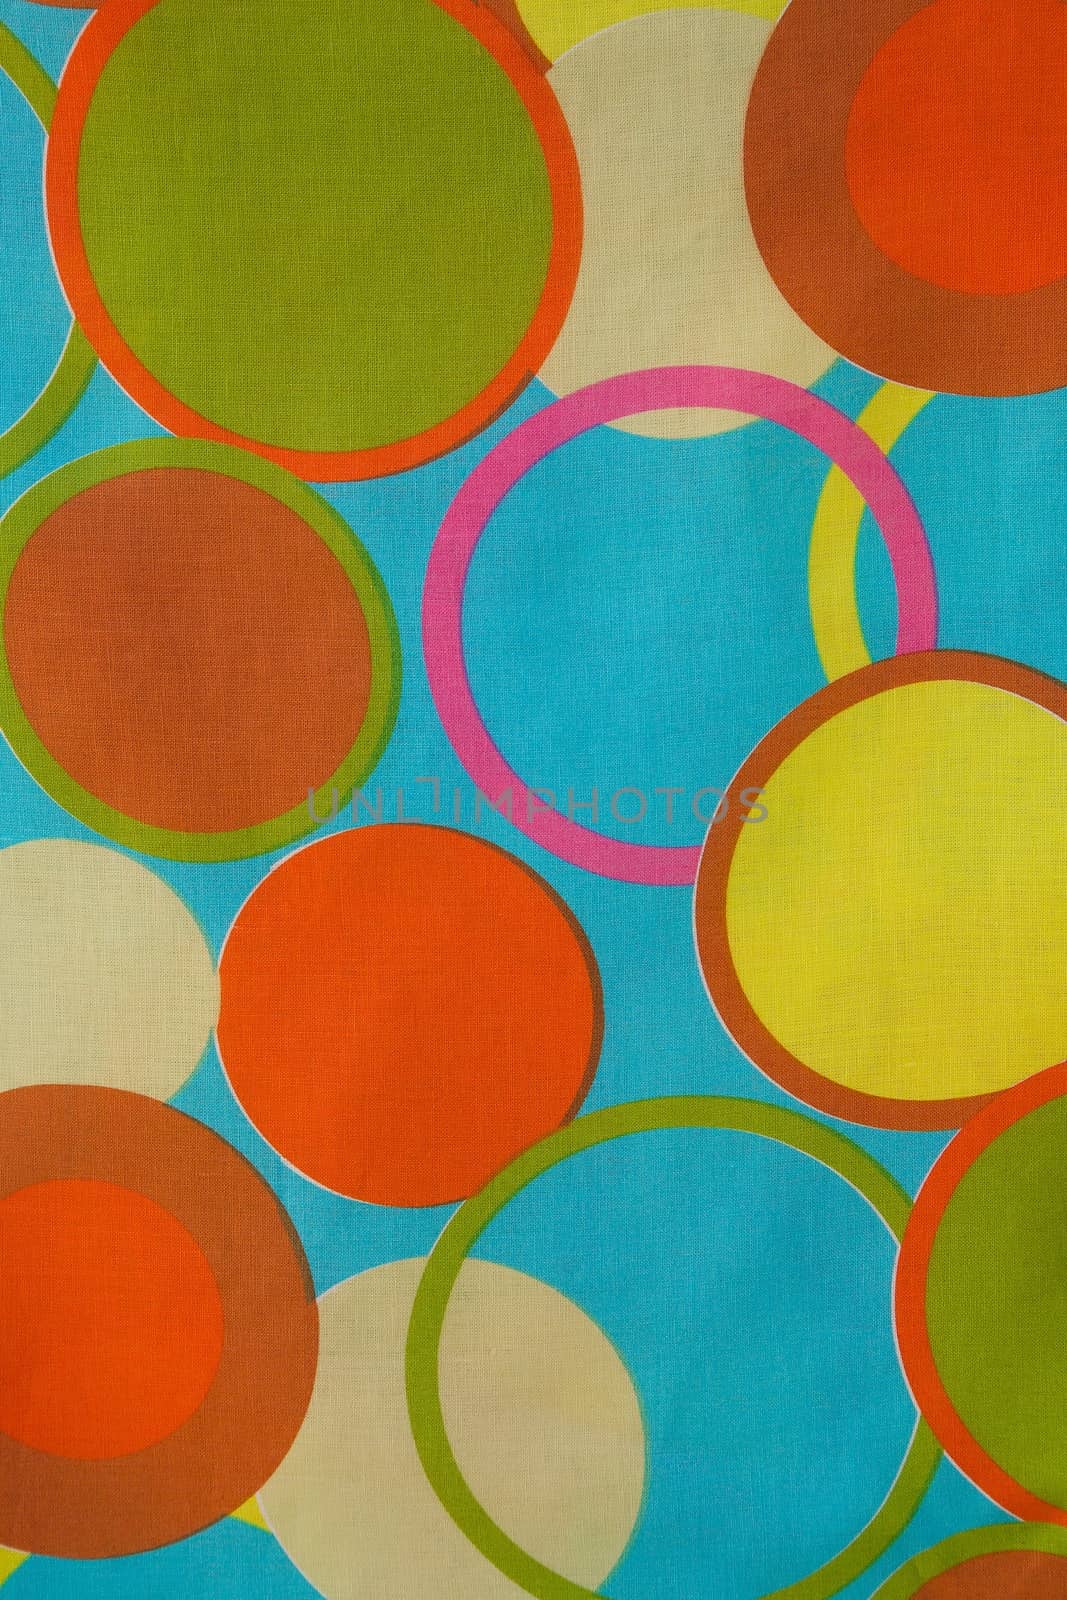 Circles on a colorful fabrics by tolikoff_photography